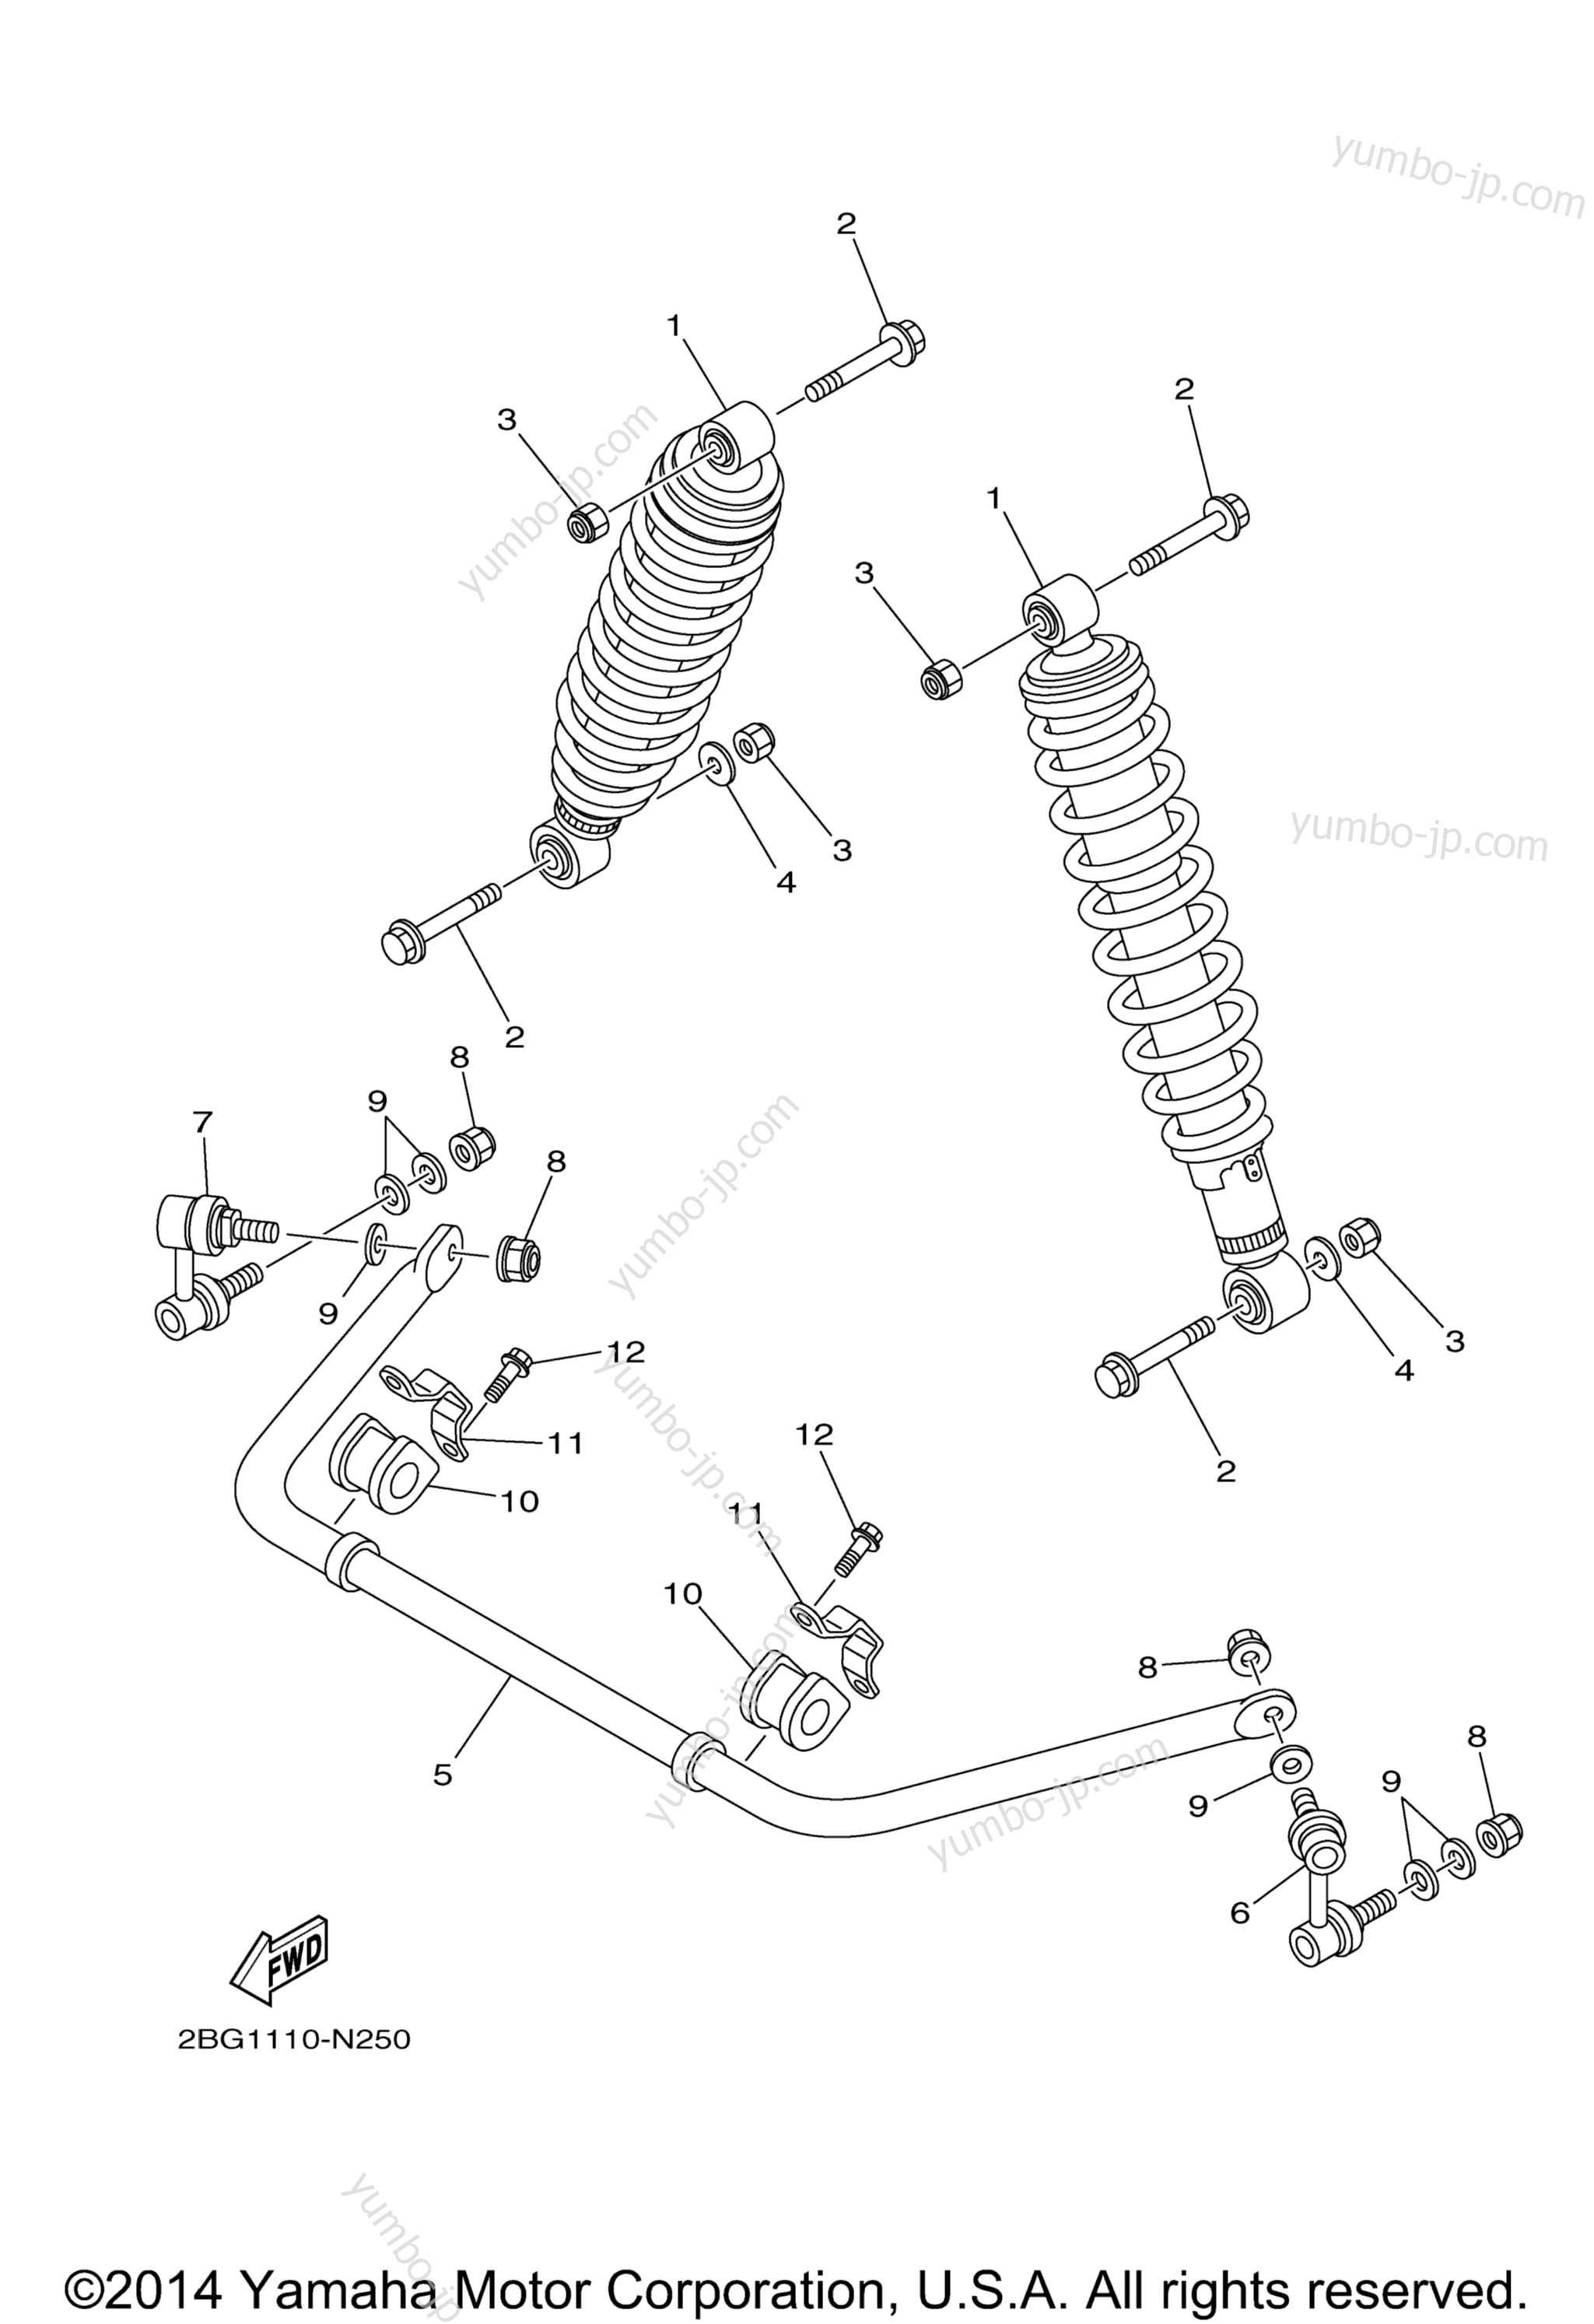 Rear Suspension for ATVs YAMAHA GRIZZLY 700 4WD (YFM700DFG) 2015 year